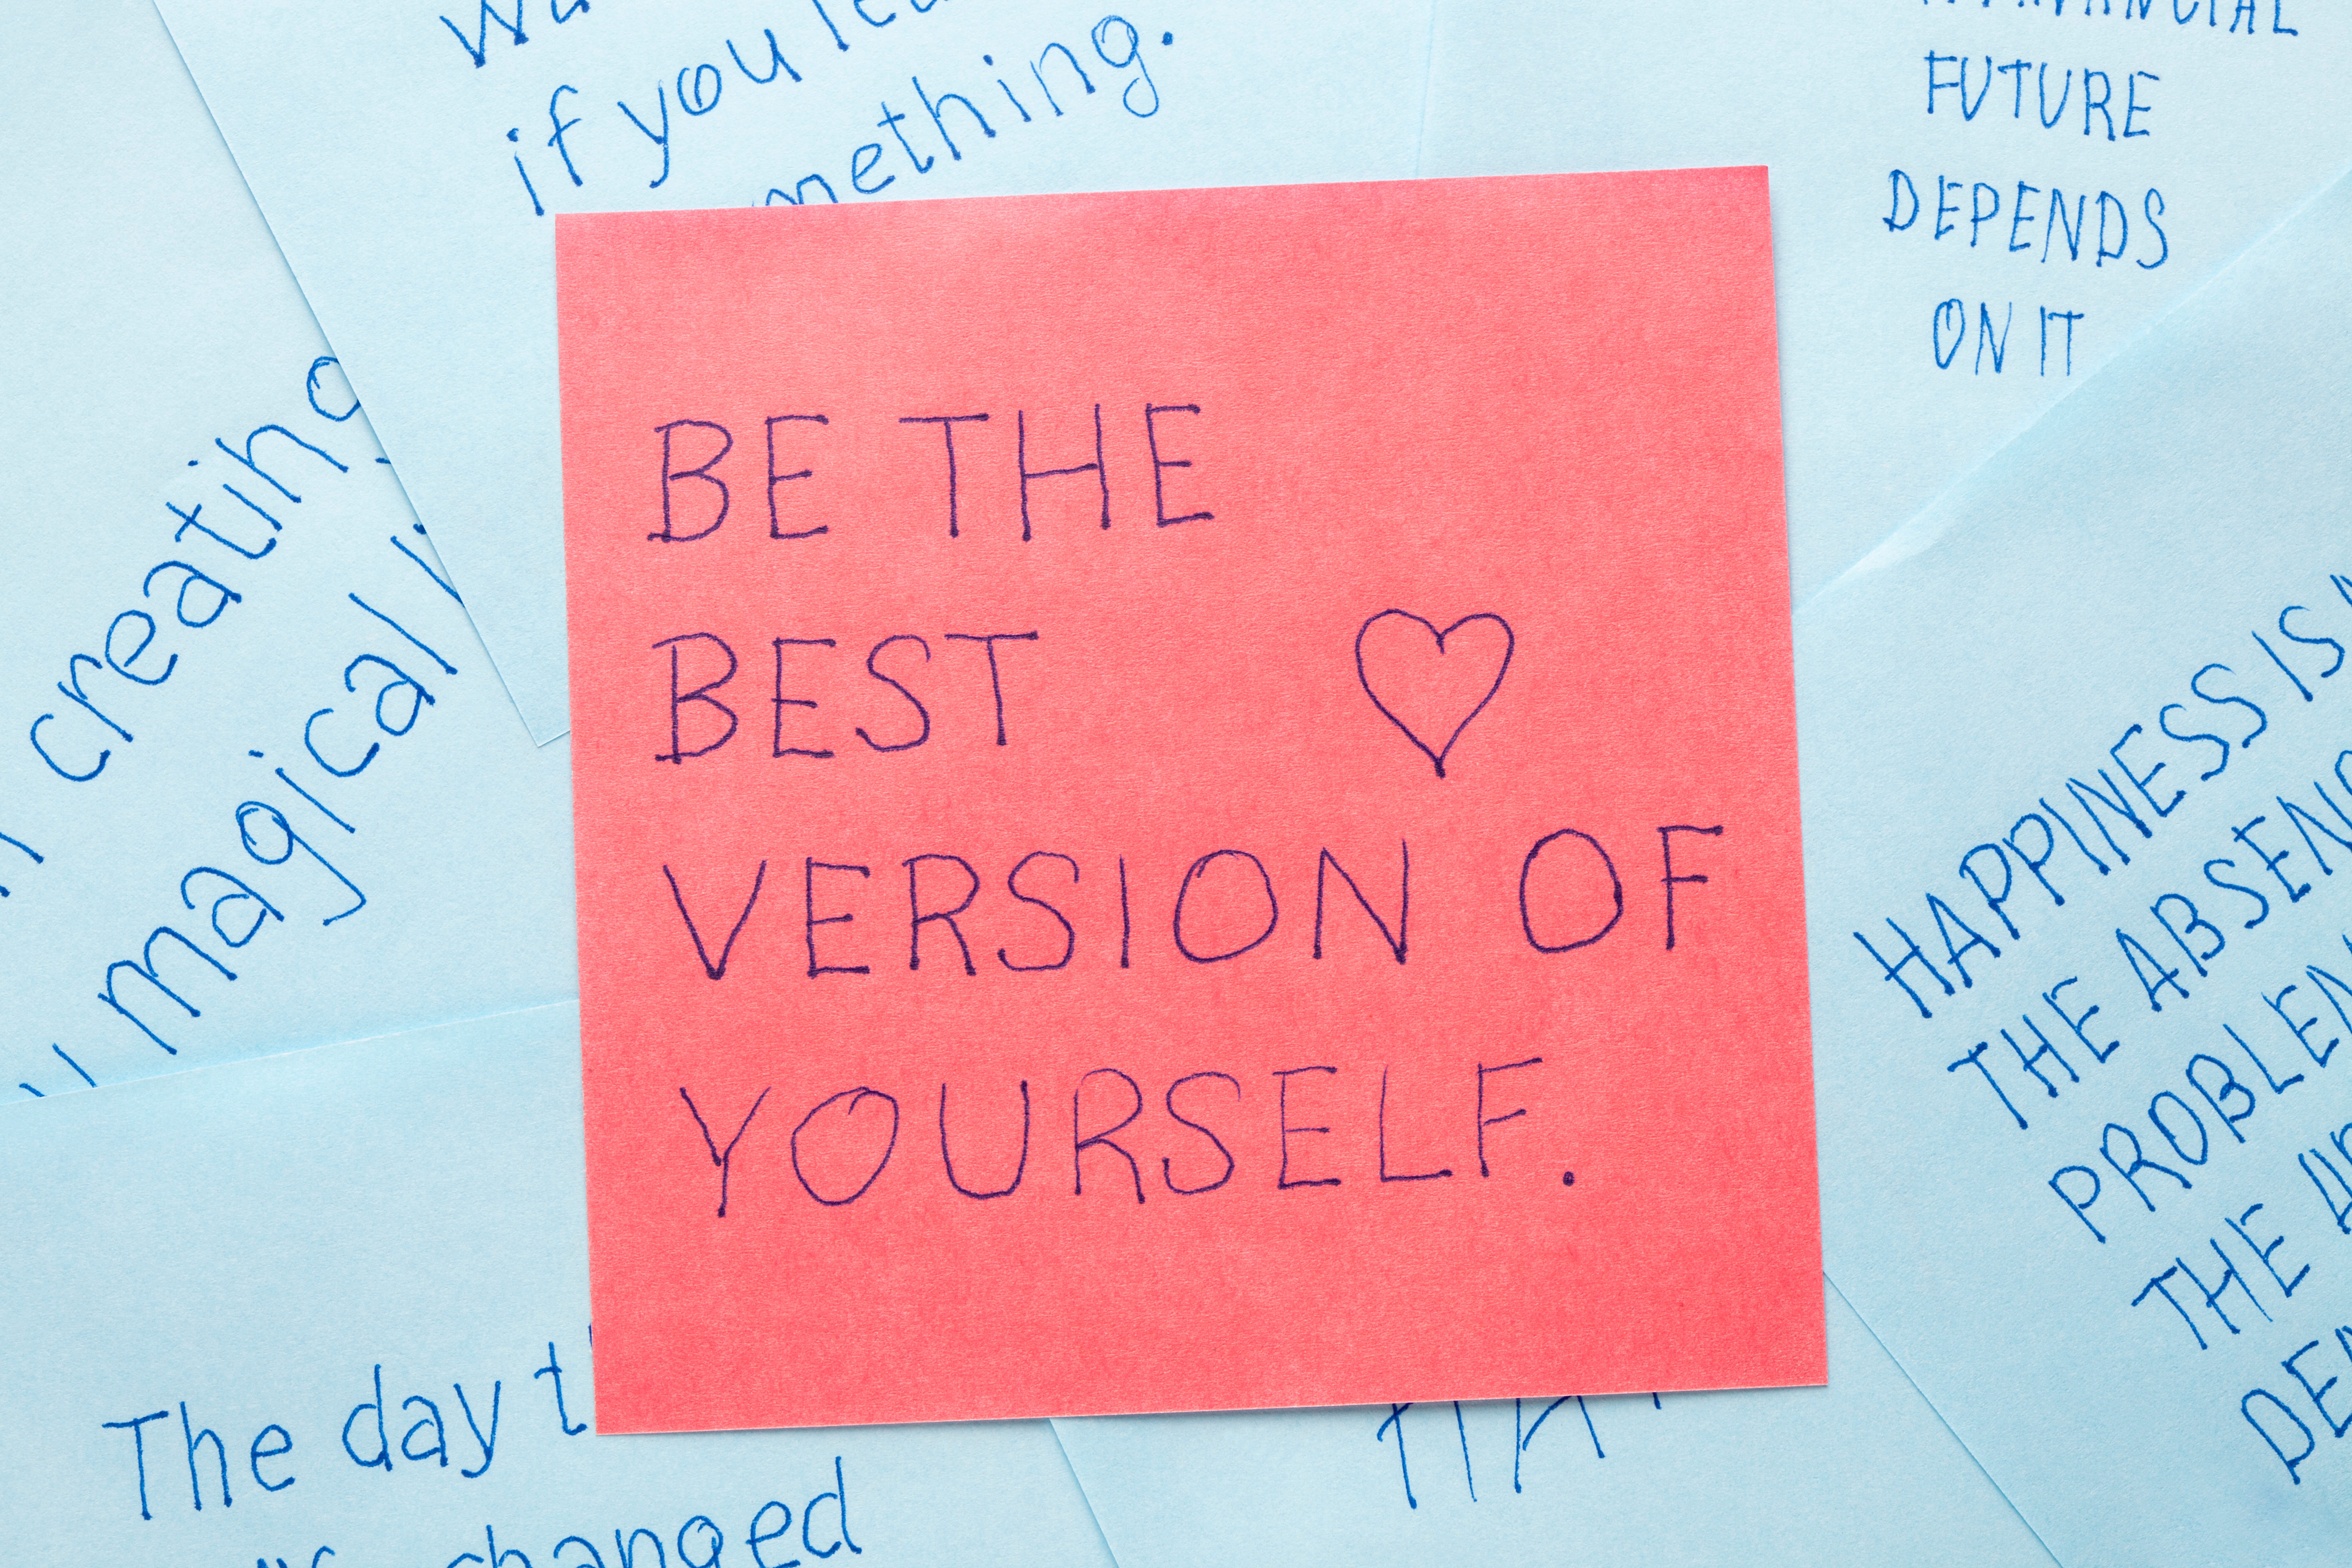 Be the best version of yourself | Benefits Of High Self-Esteem